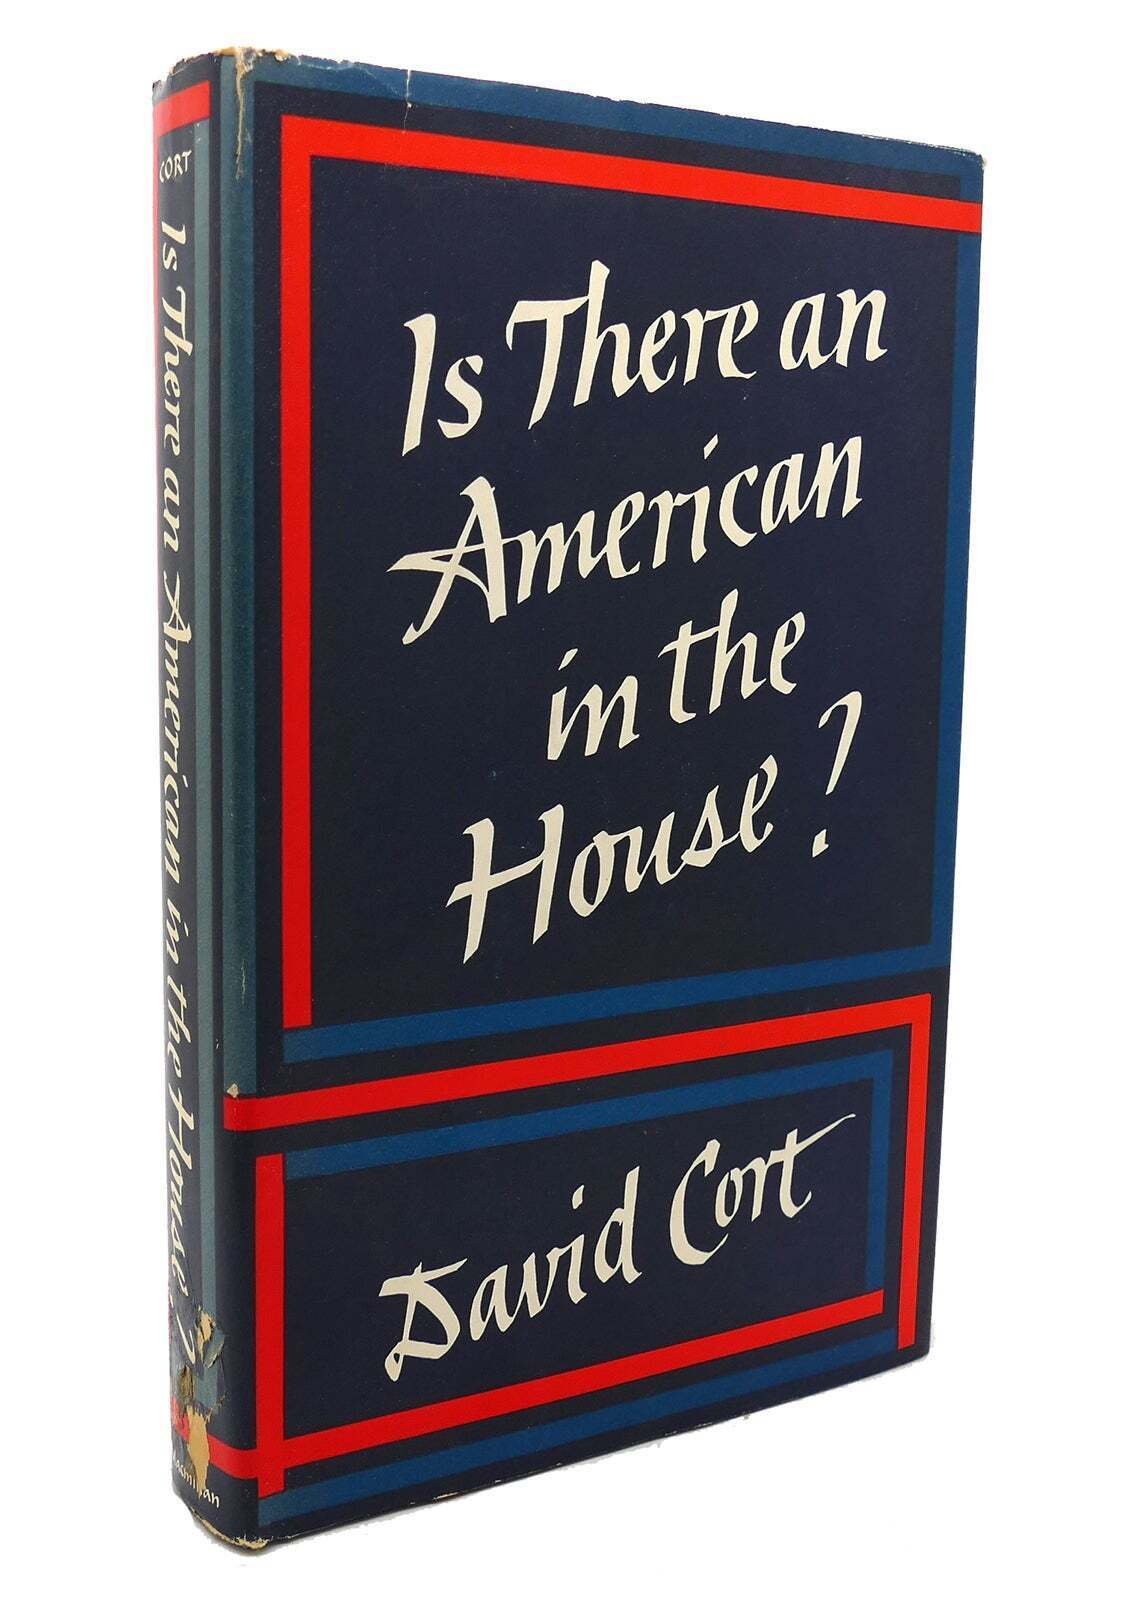 David Cort IS THERE AN AMERICAN IN THE HOUSE?   1st Edition 1st Printing